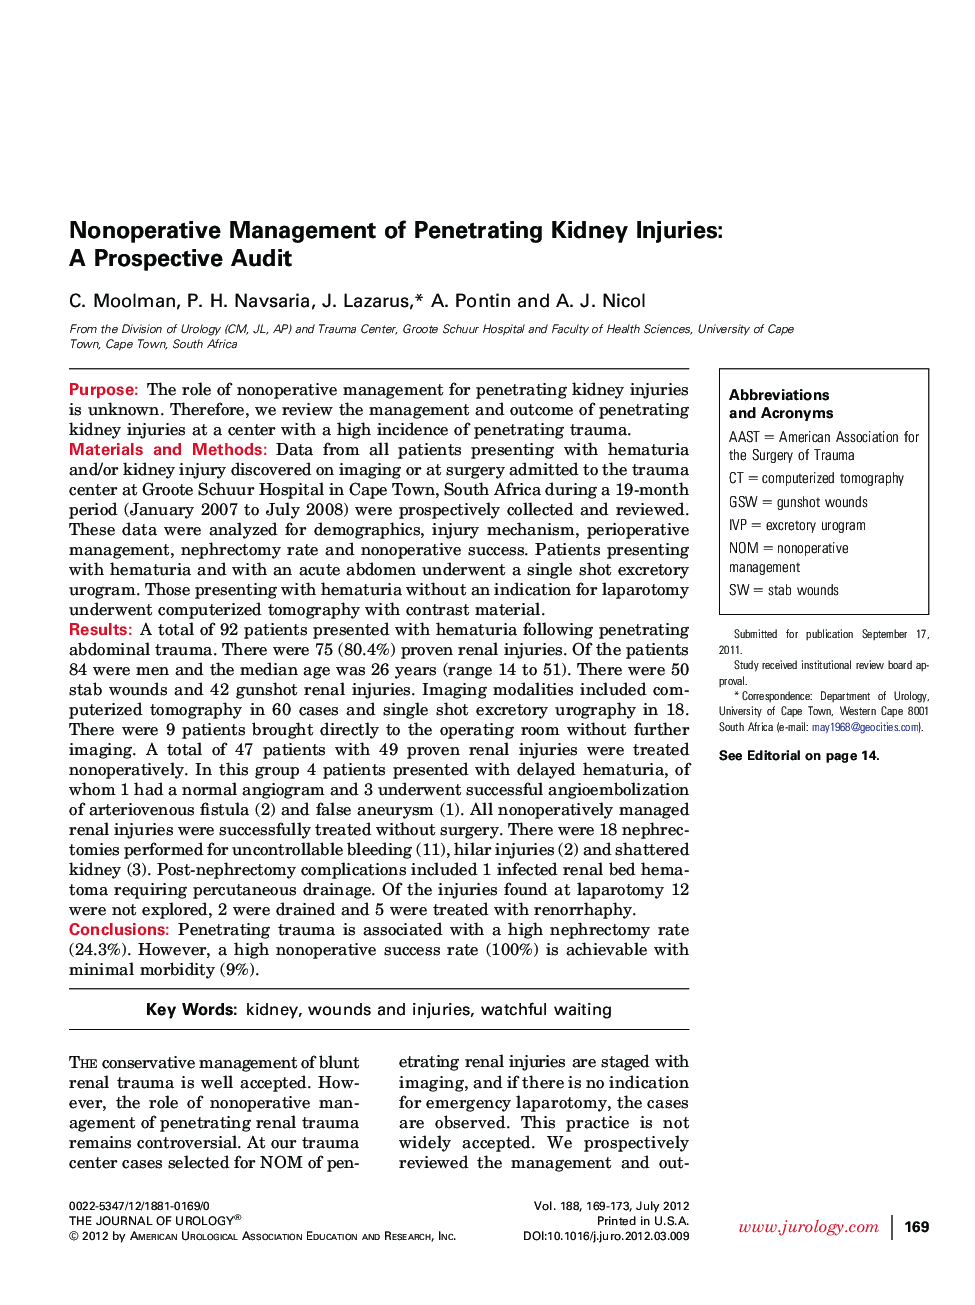 Nonoperative Management of Penetrating Kidney Injuries: A Prospective Audit 